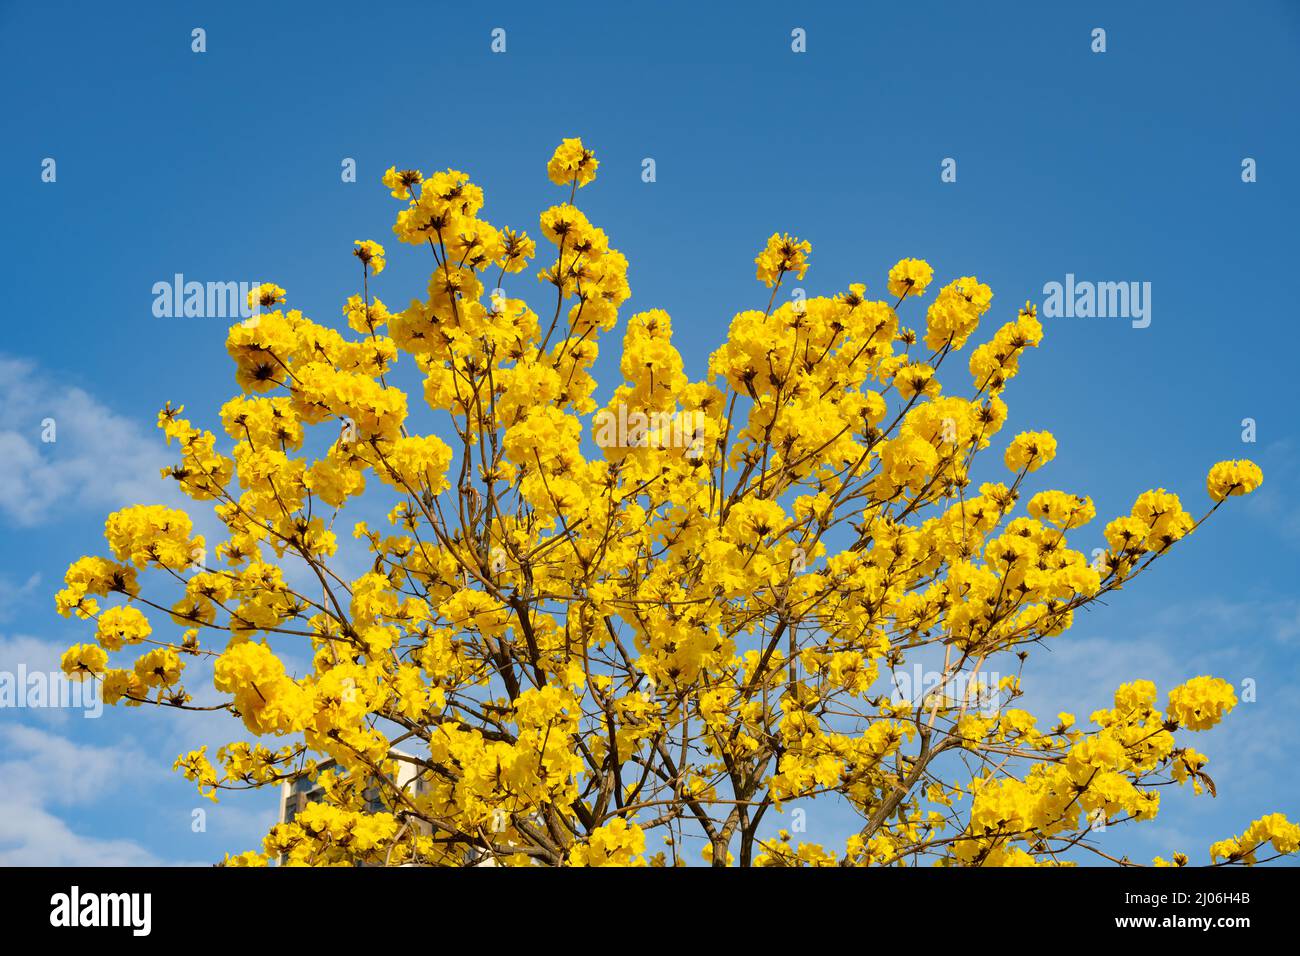 blooming Guayacan or Handroanthus chrysanthus or Golden Bell Tree under blue sky Stock Photo